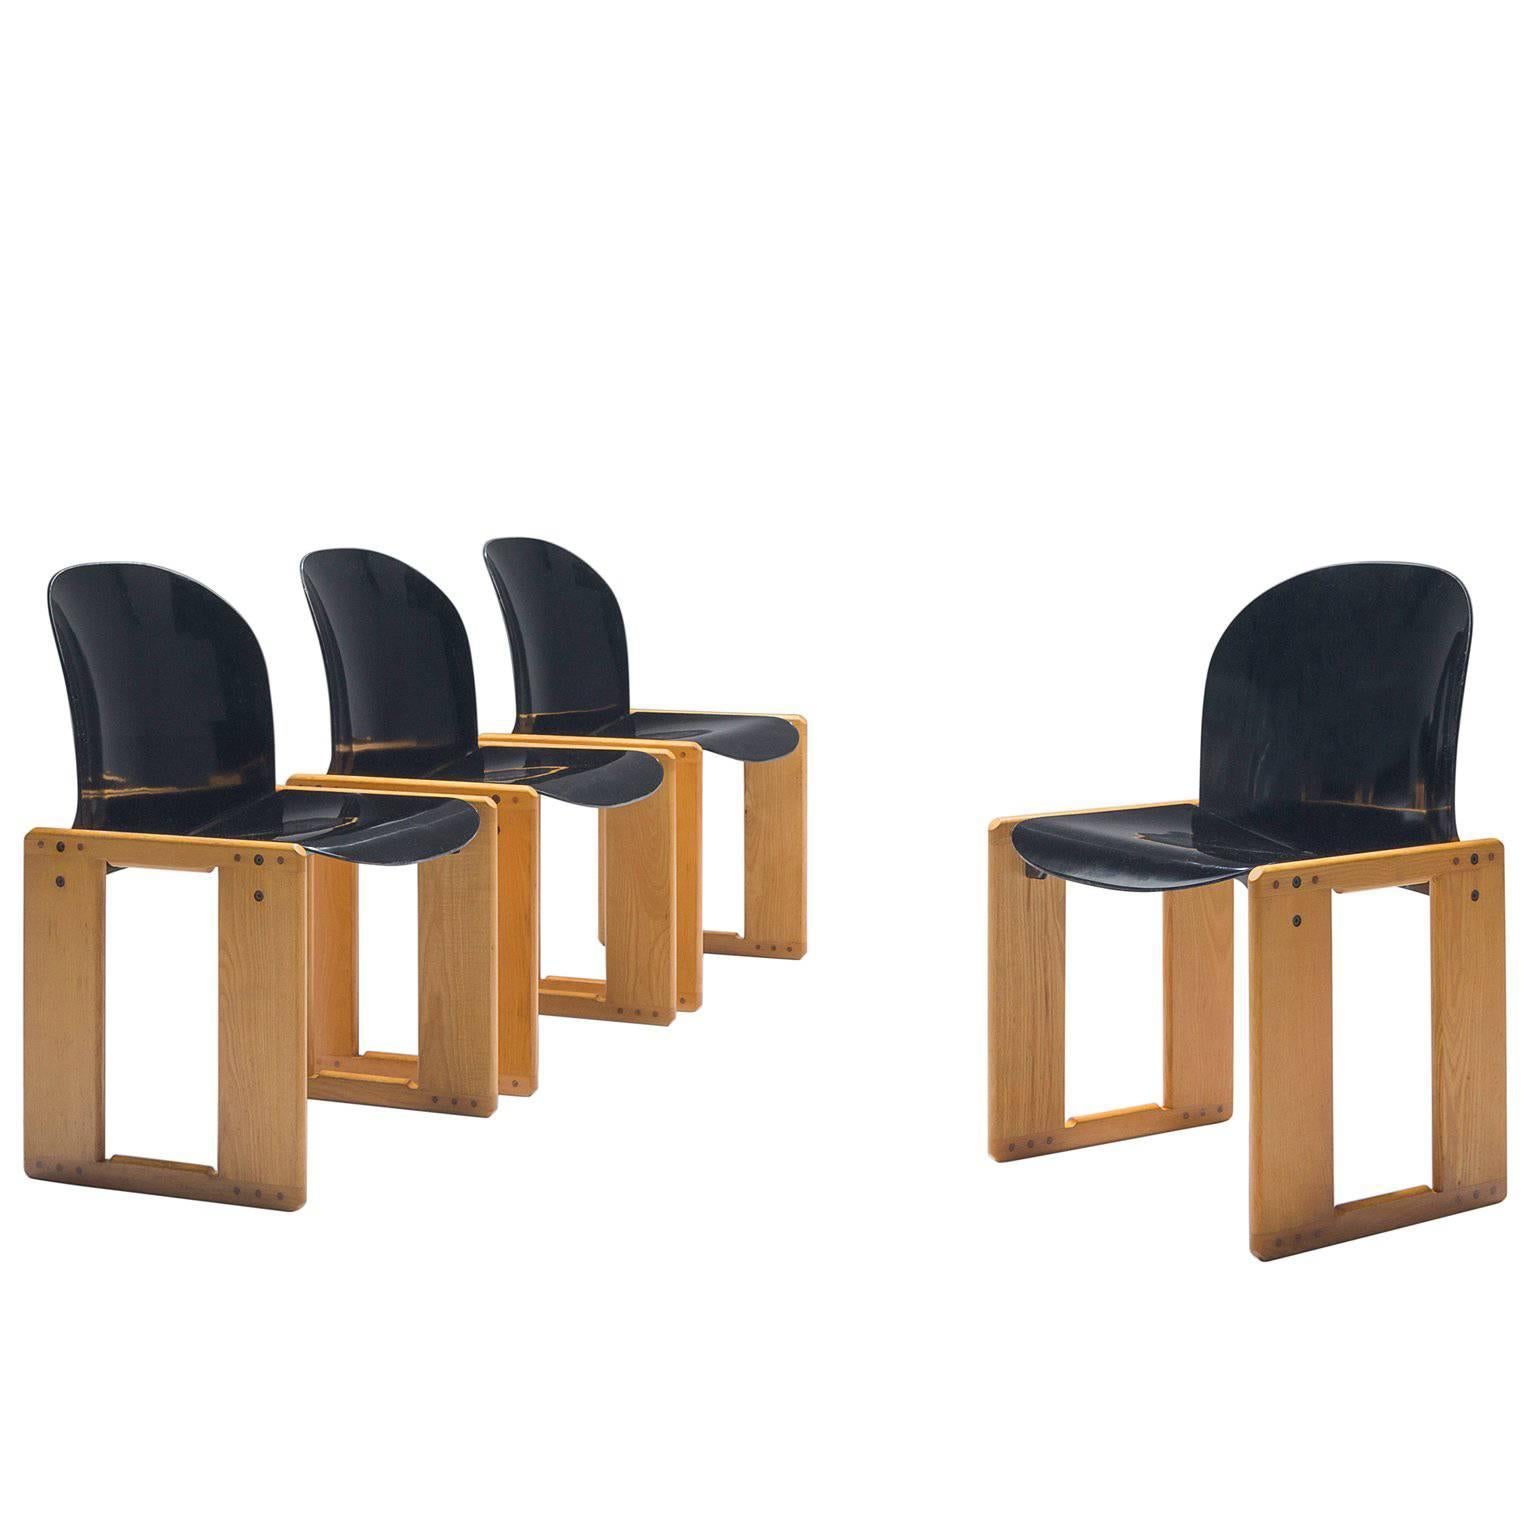 Afra and Tobia Scarpa Chairs in Black and Walnut for Cassina